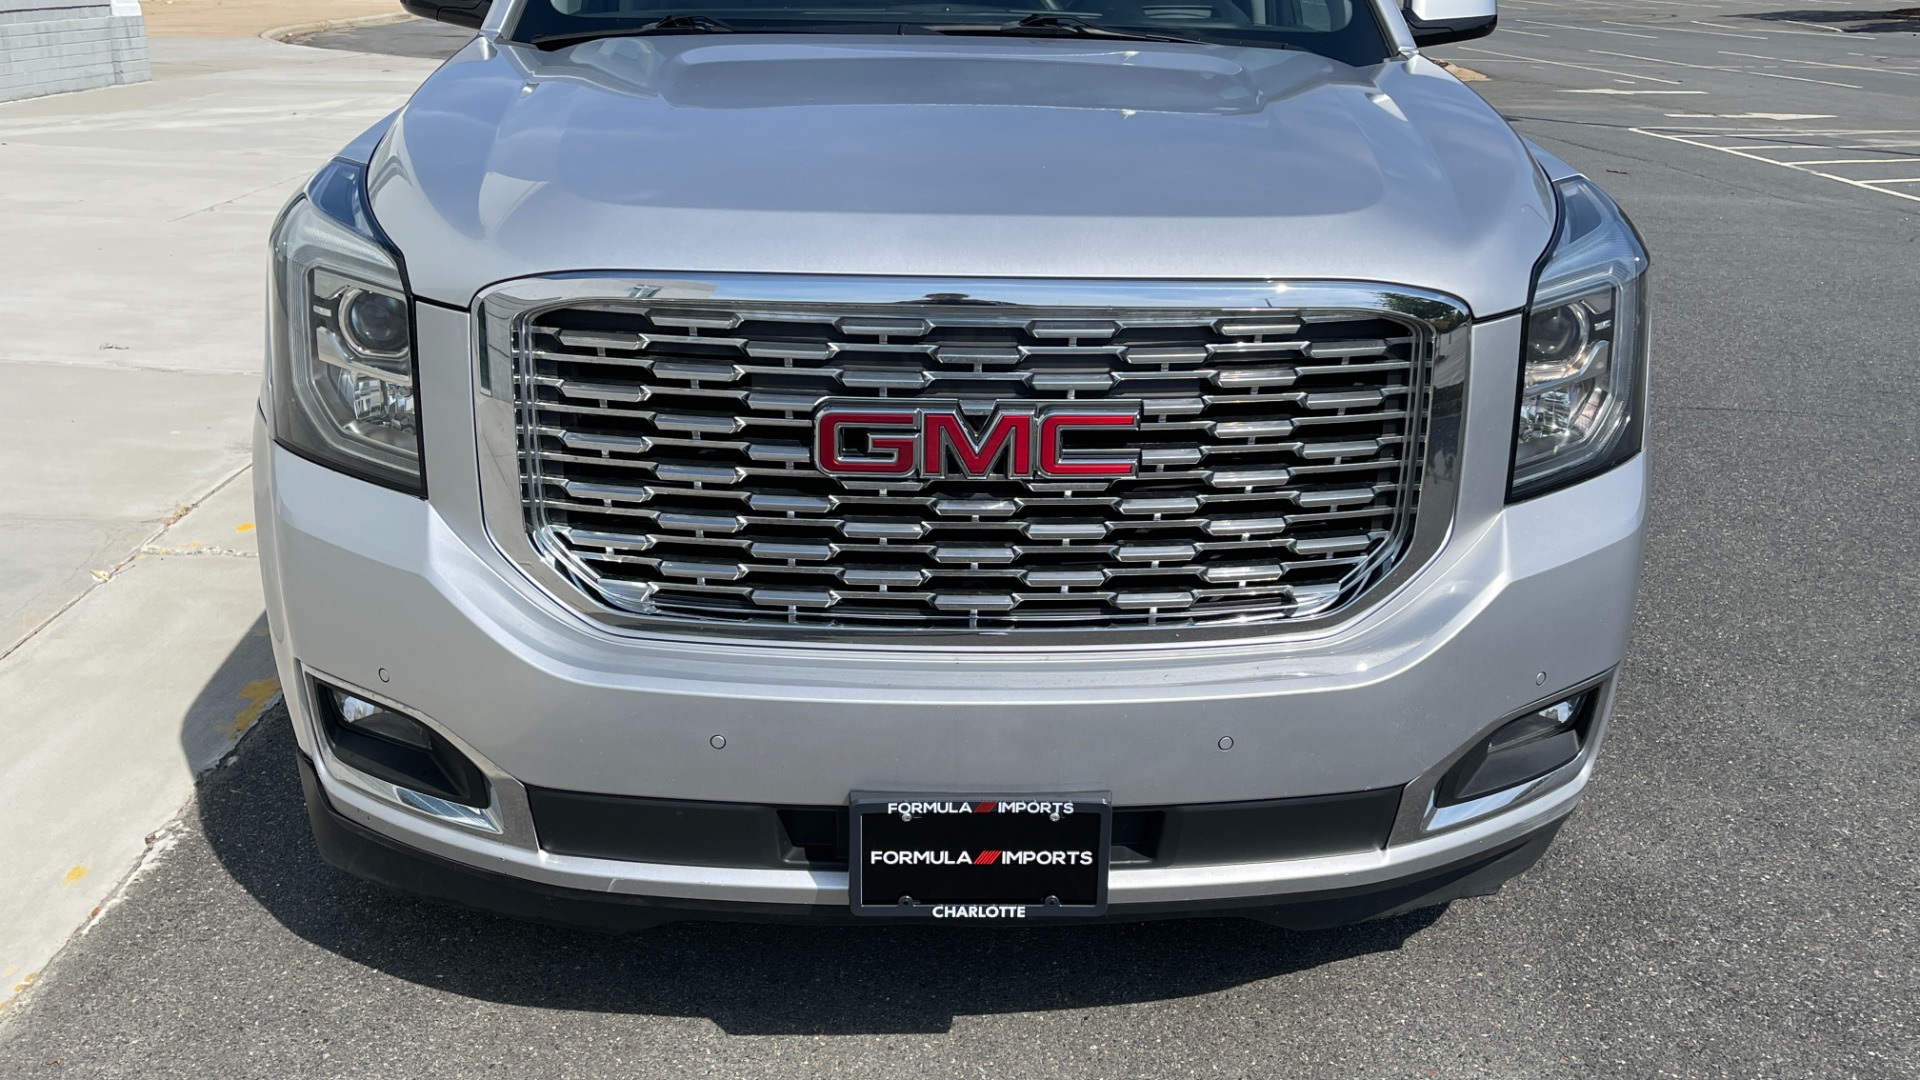 Used 2019 GMC Yukon XL DENALI / LEATHER / 4WD / CAPTAINS CHAIRS / 3 ROW SEATING for sale $55,000 at Formula Imports in Charlotte NC 28227 9